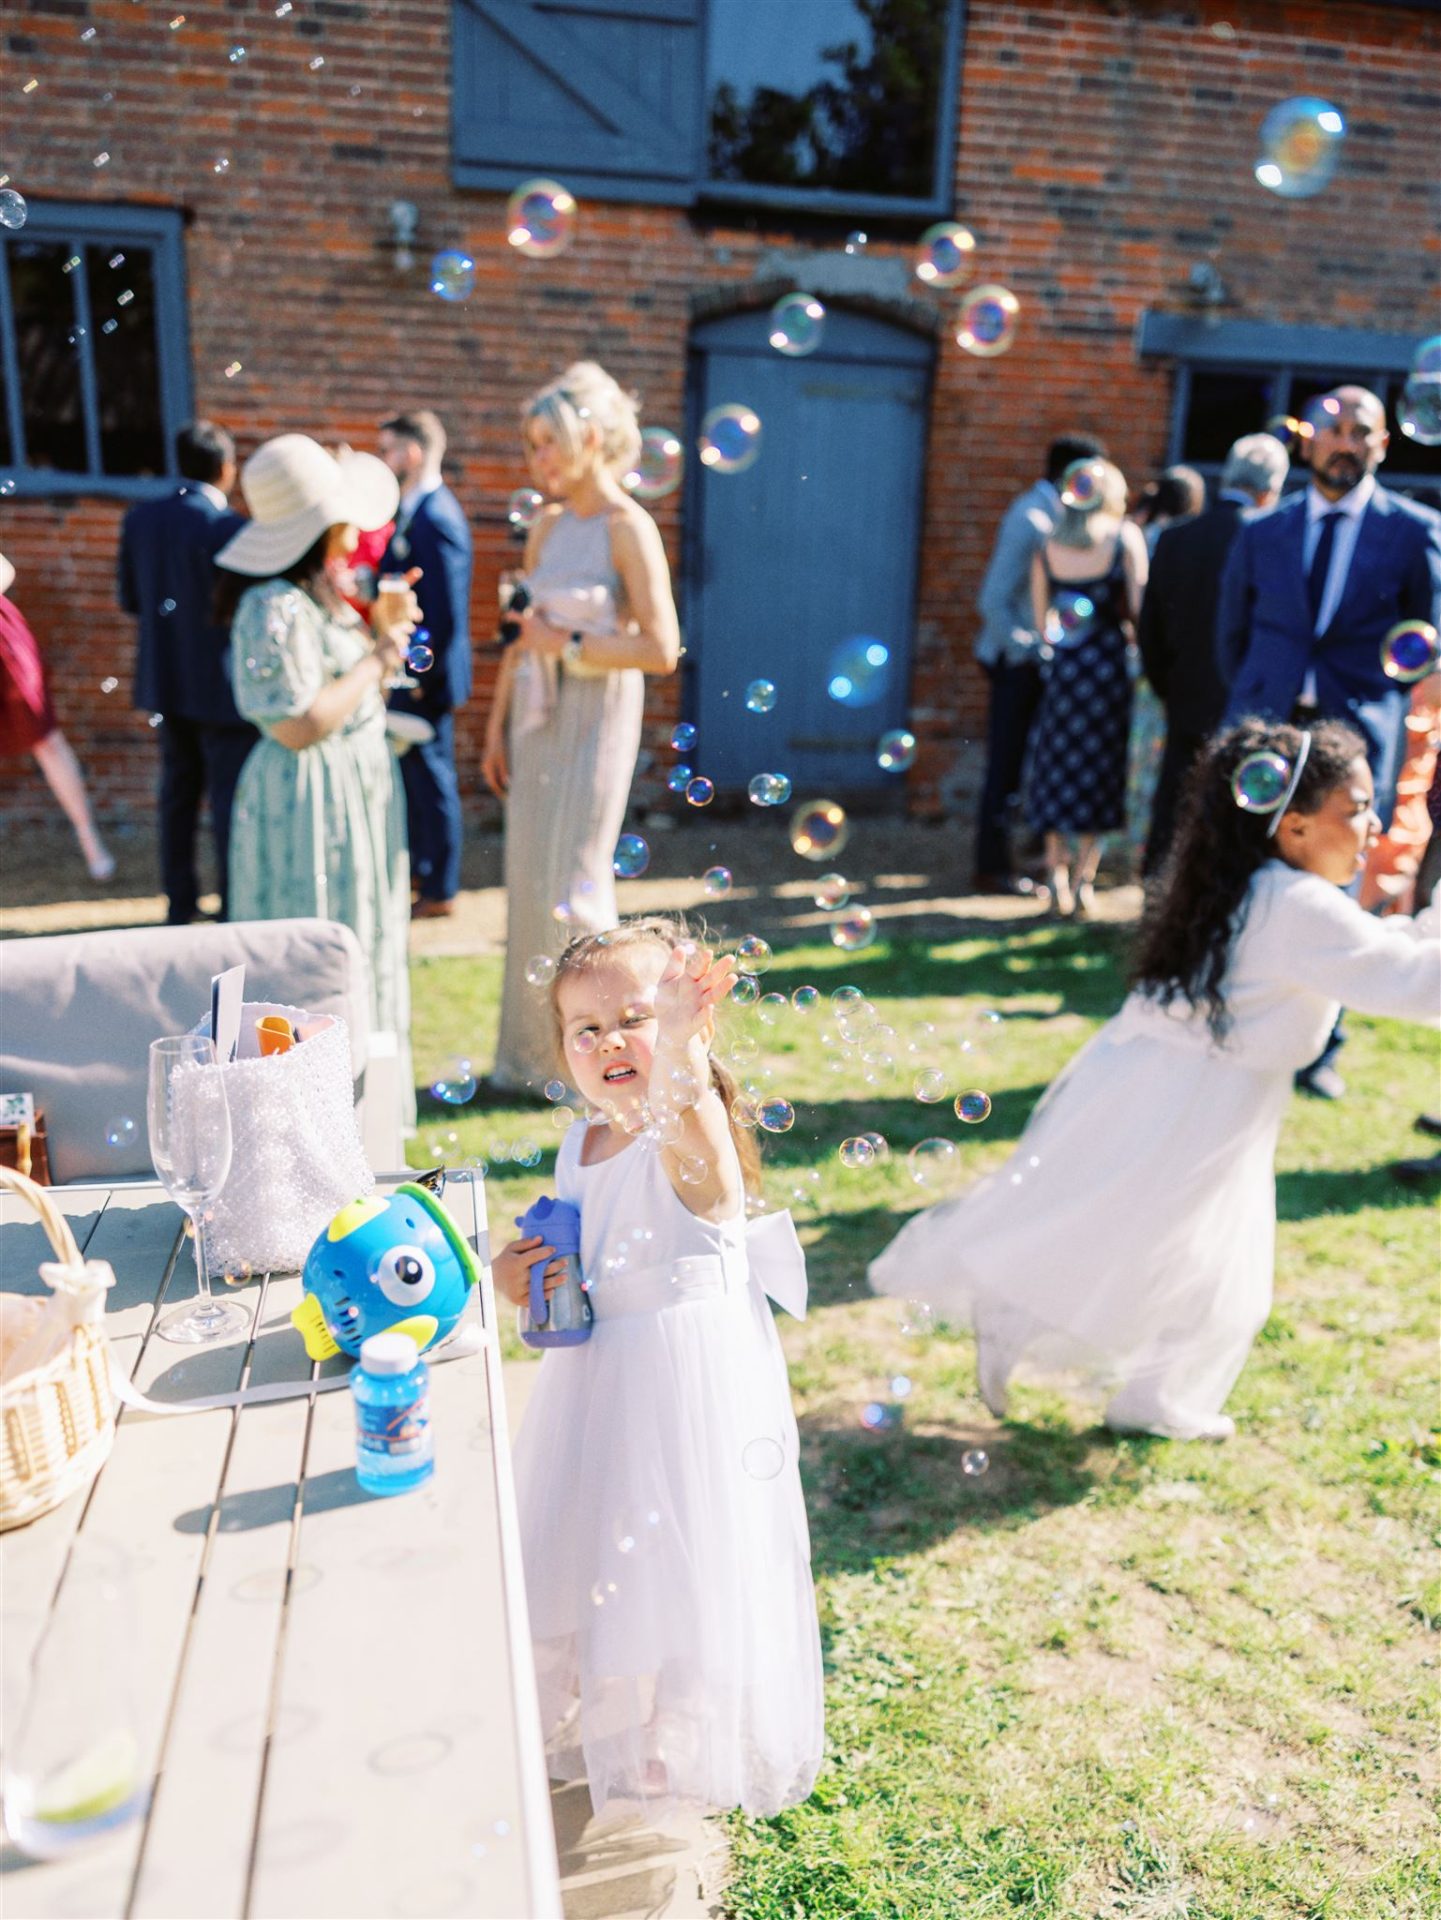 Little girls in white bridesmaid dresses playing in front of a bubble machine